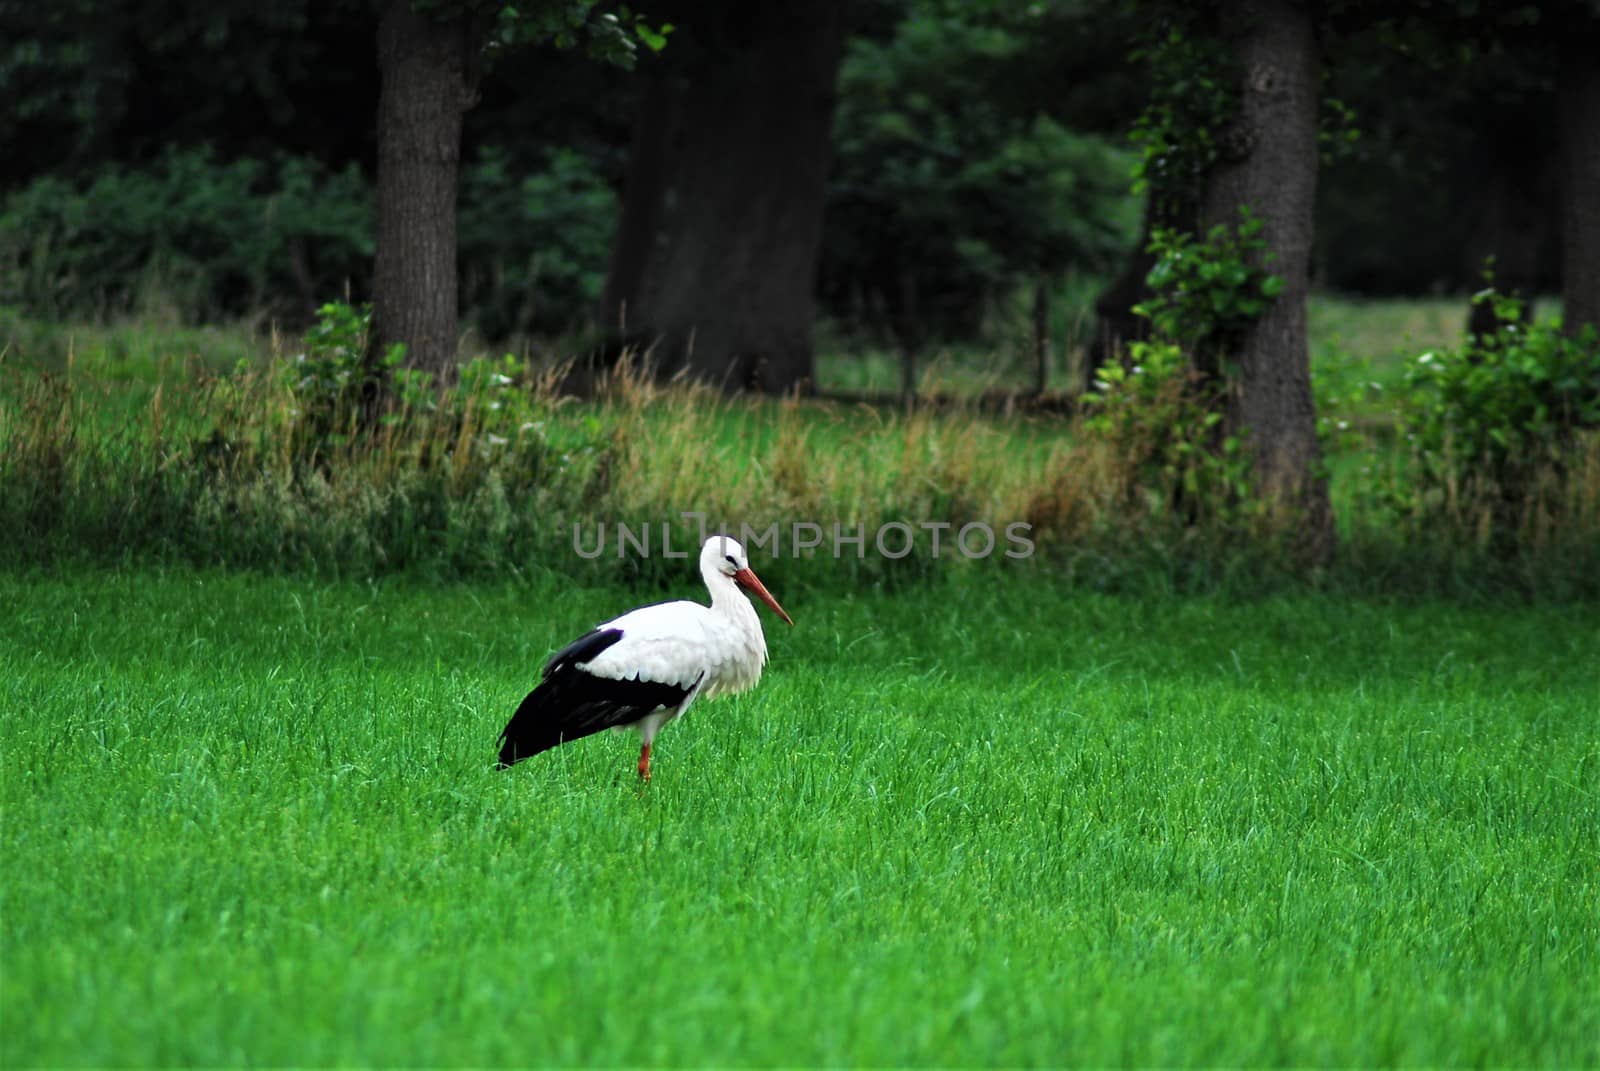 A white storck on a mown green pasture